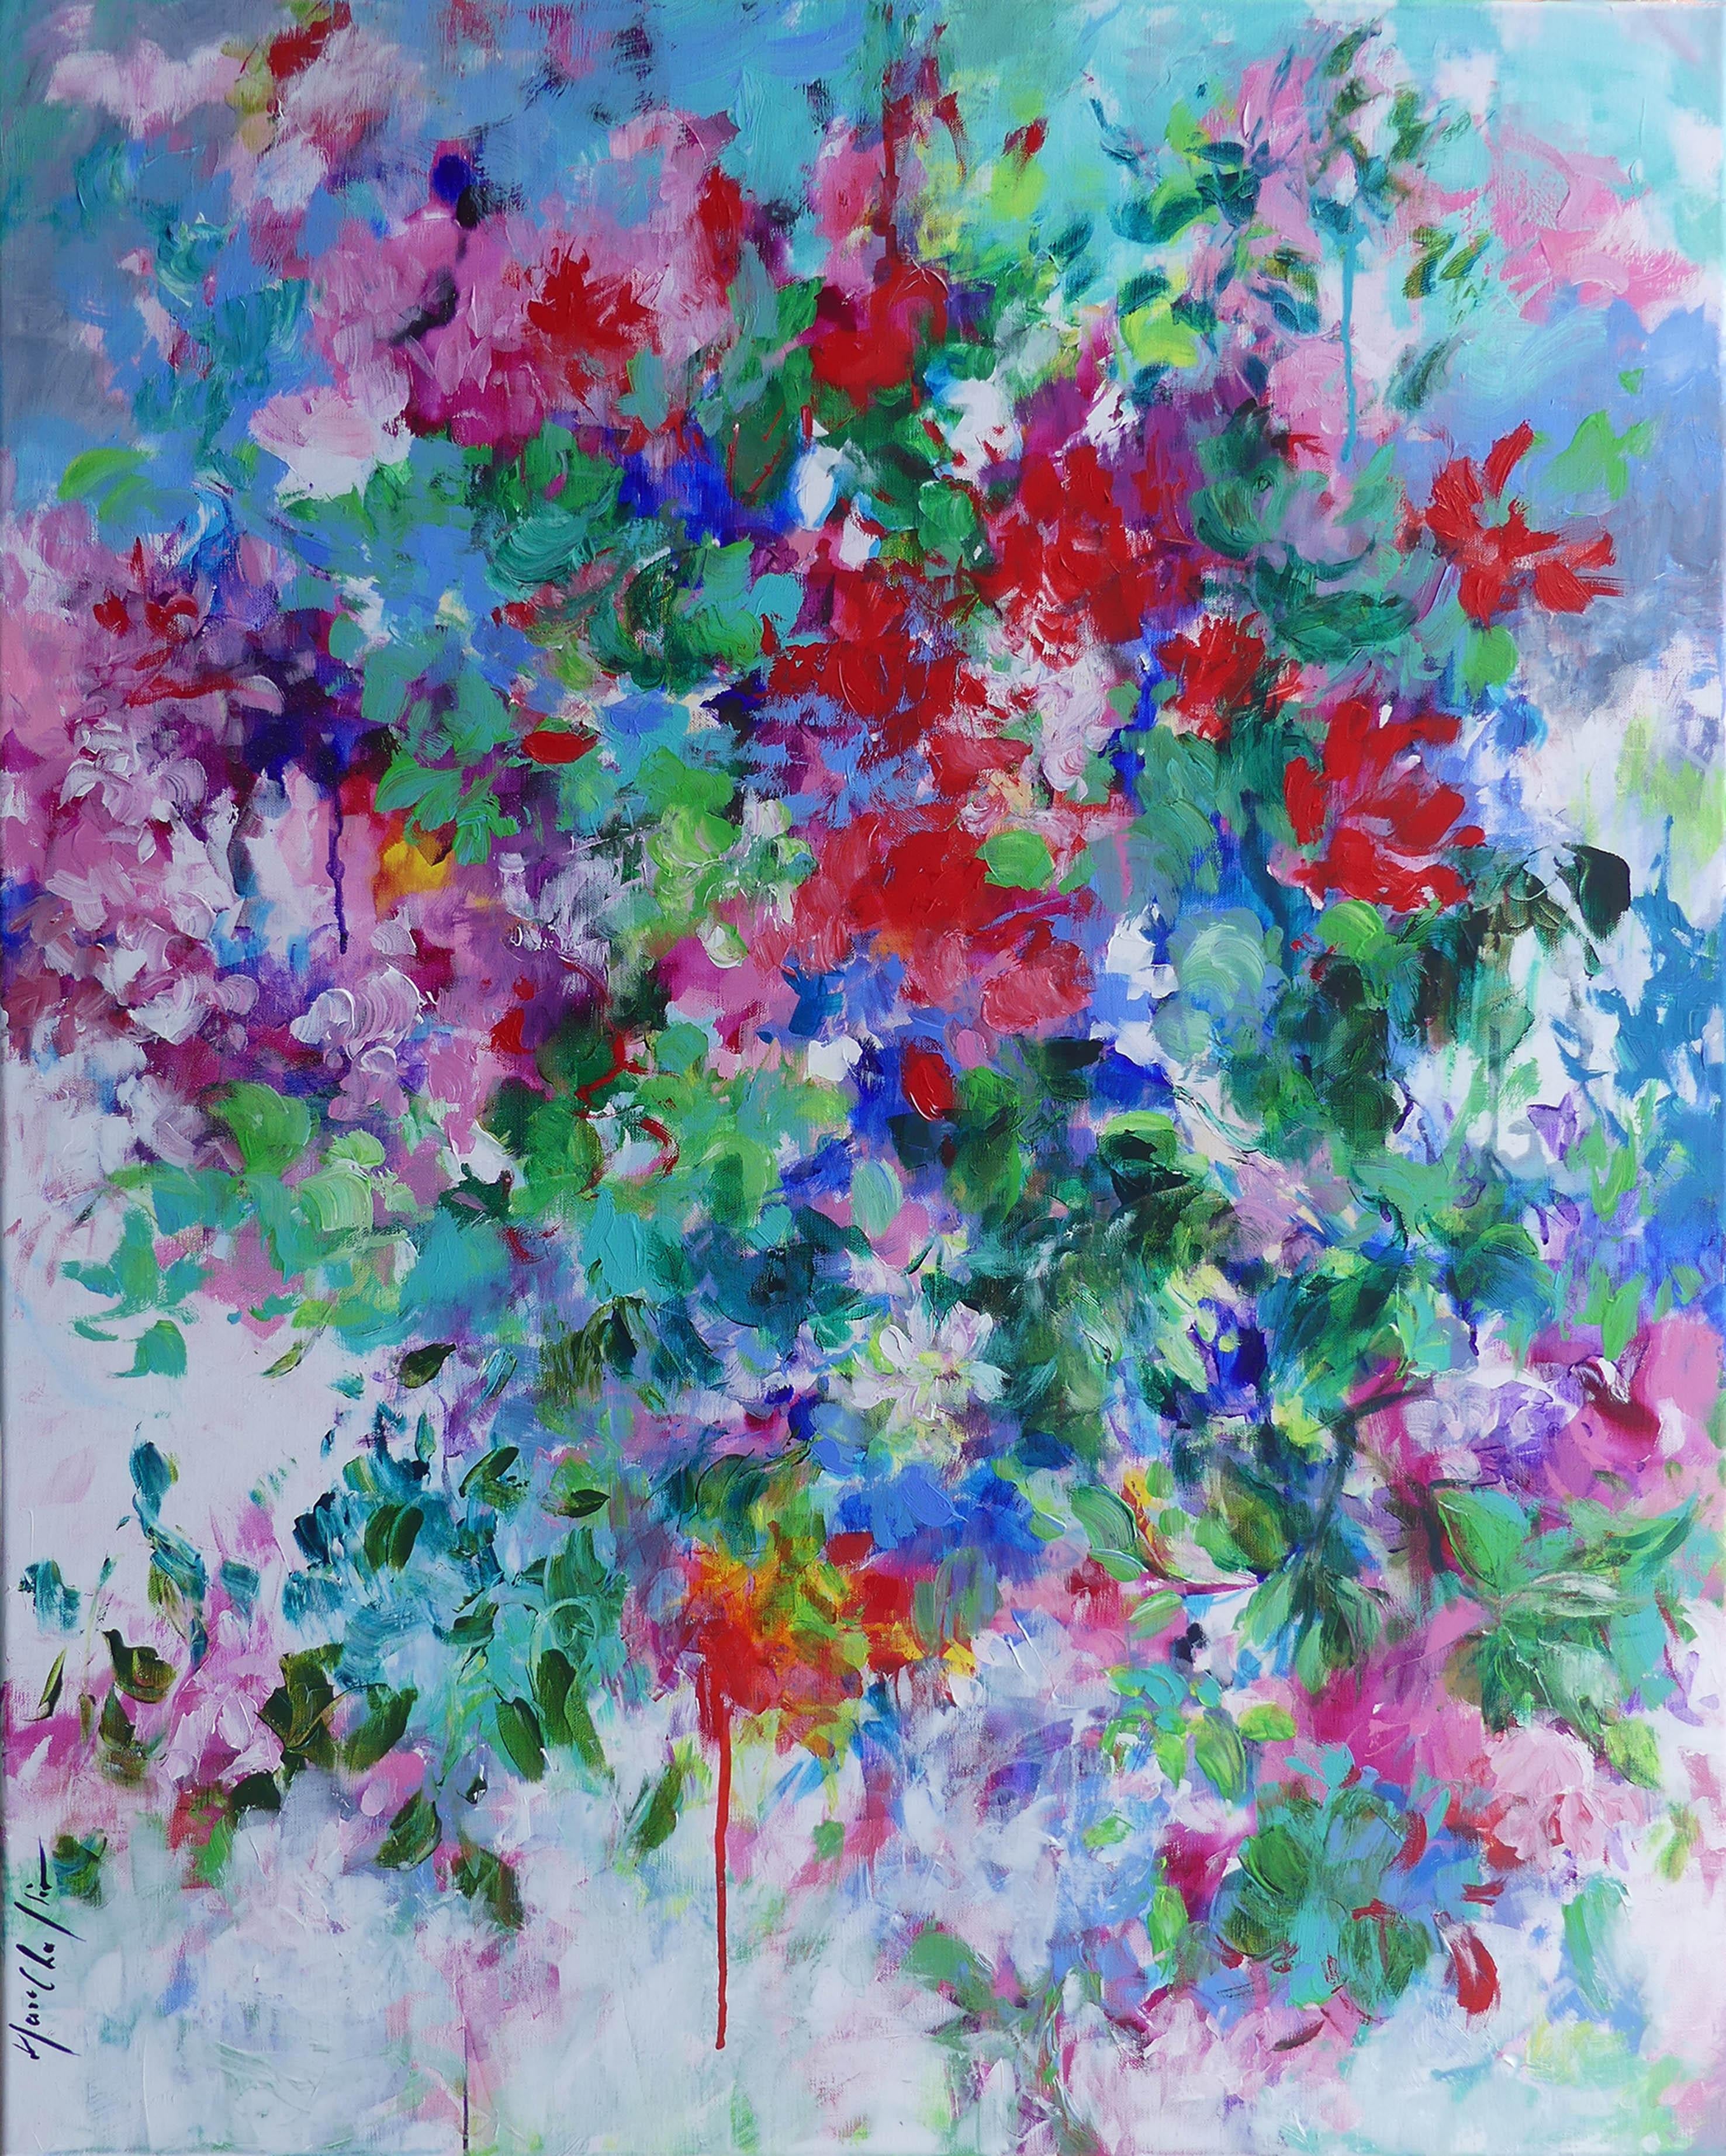 Mary Chaplin Landscape Painting - The season of happiness, Original art, Landscape, floral, Abstract, Nature 